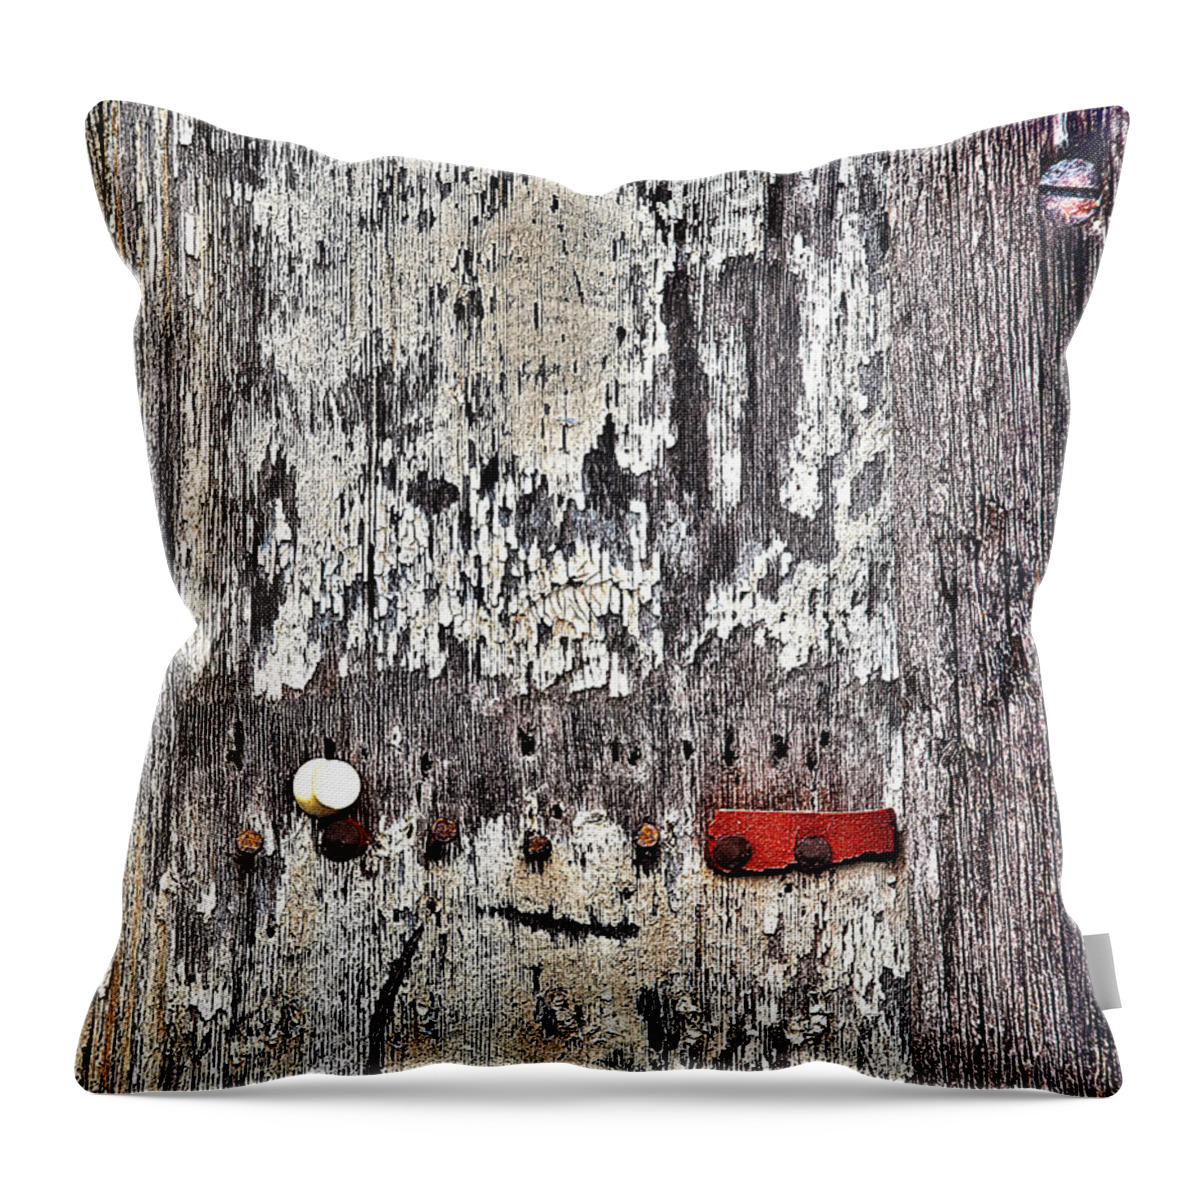 Wood Throw Pillow featuring the photograph Weathered Wood by Rick Mosher